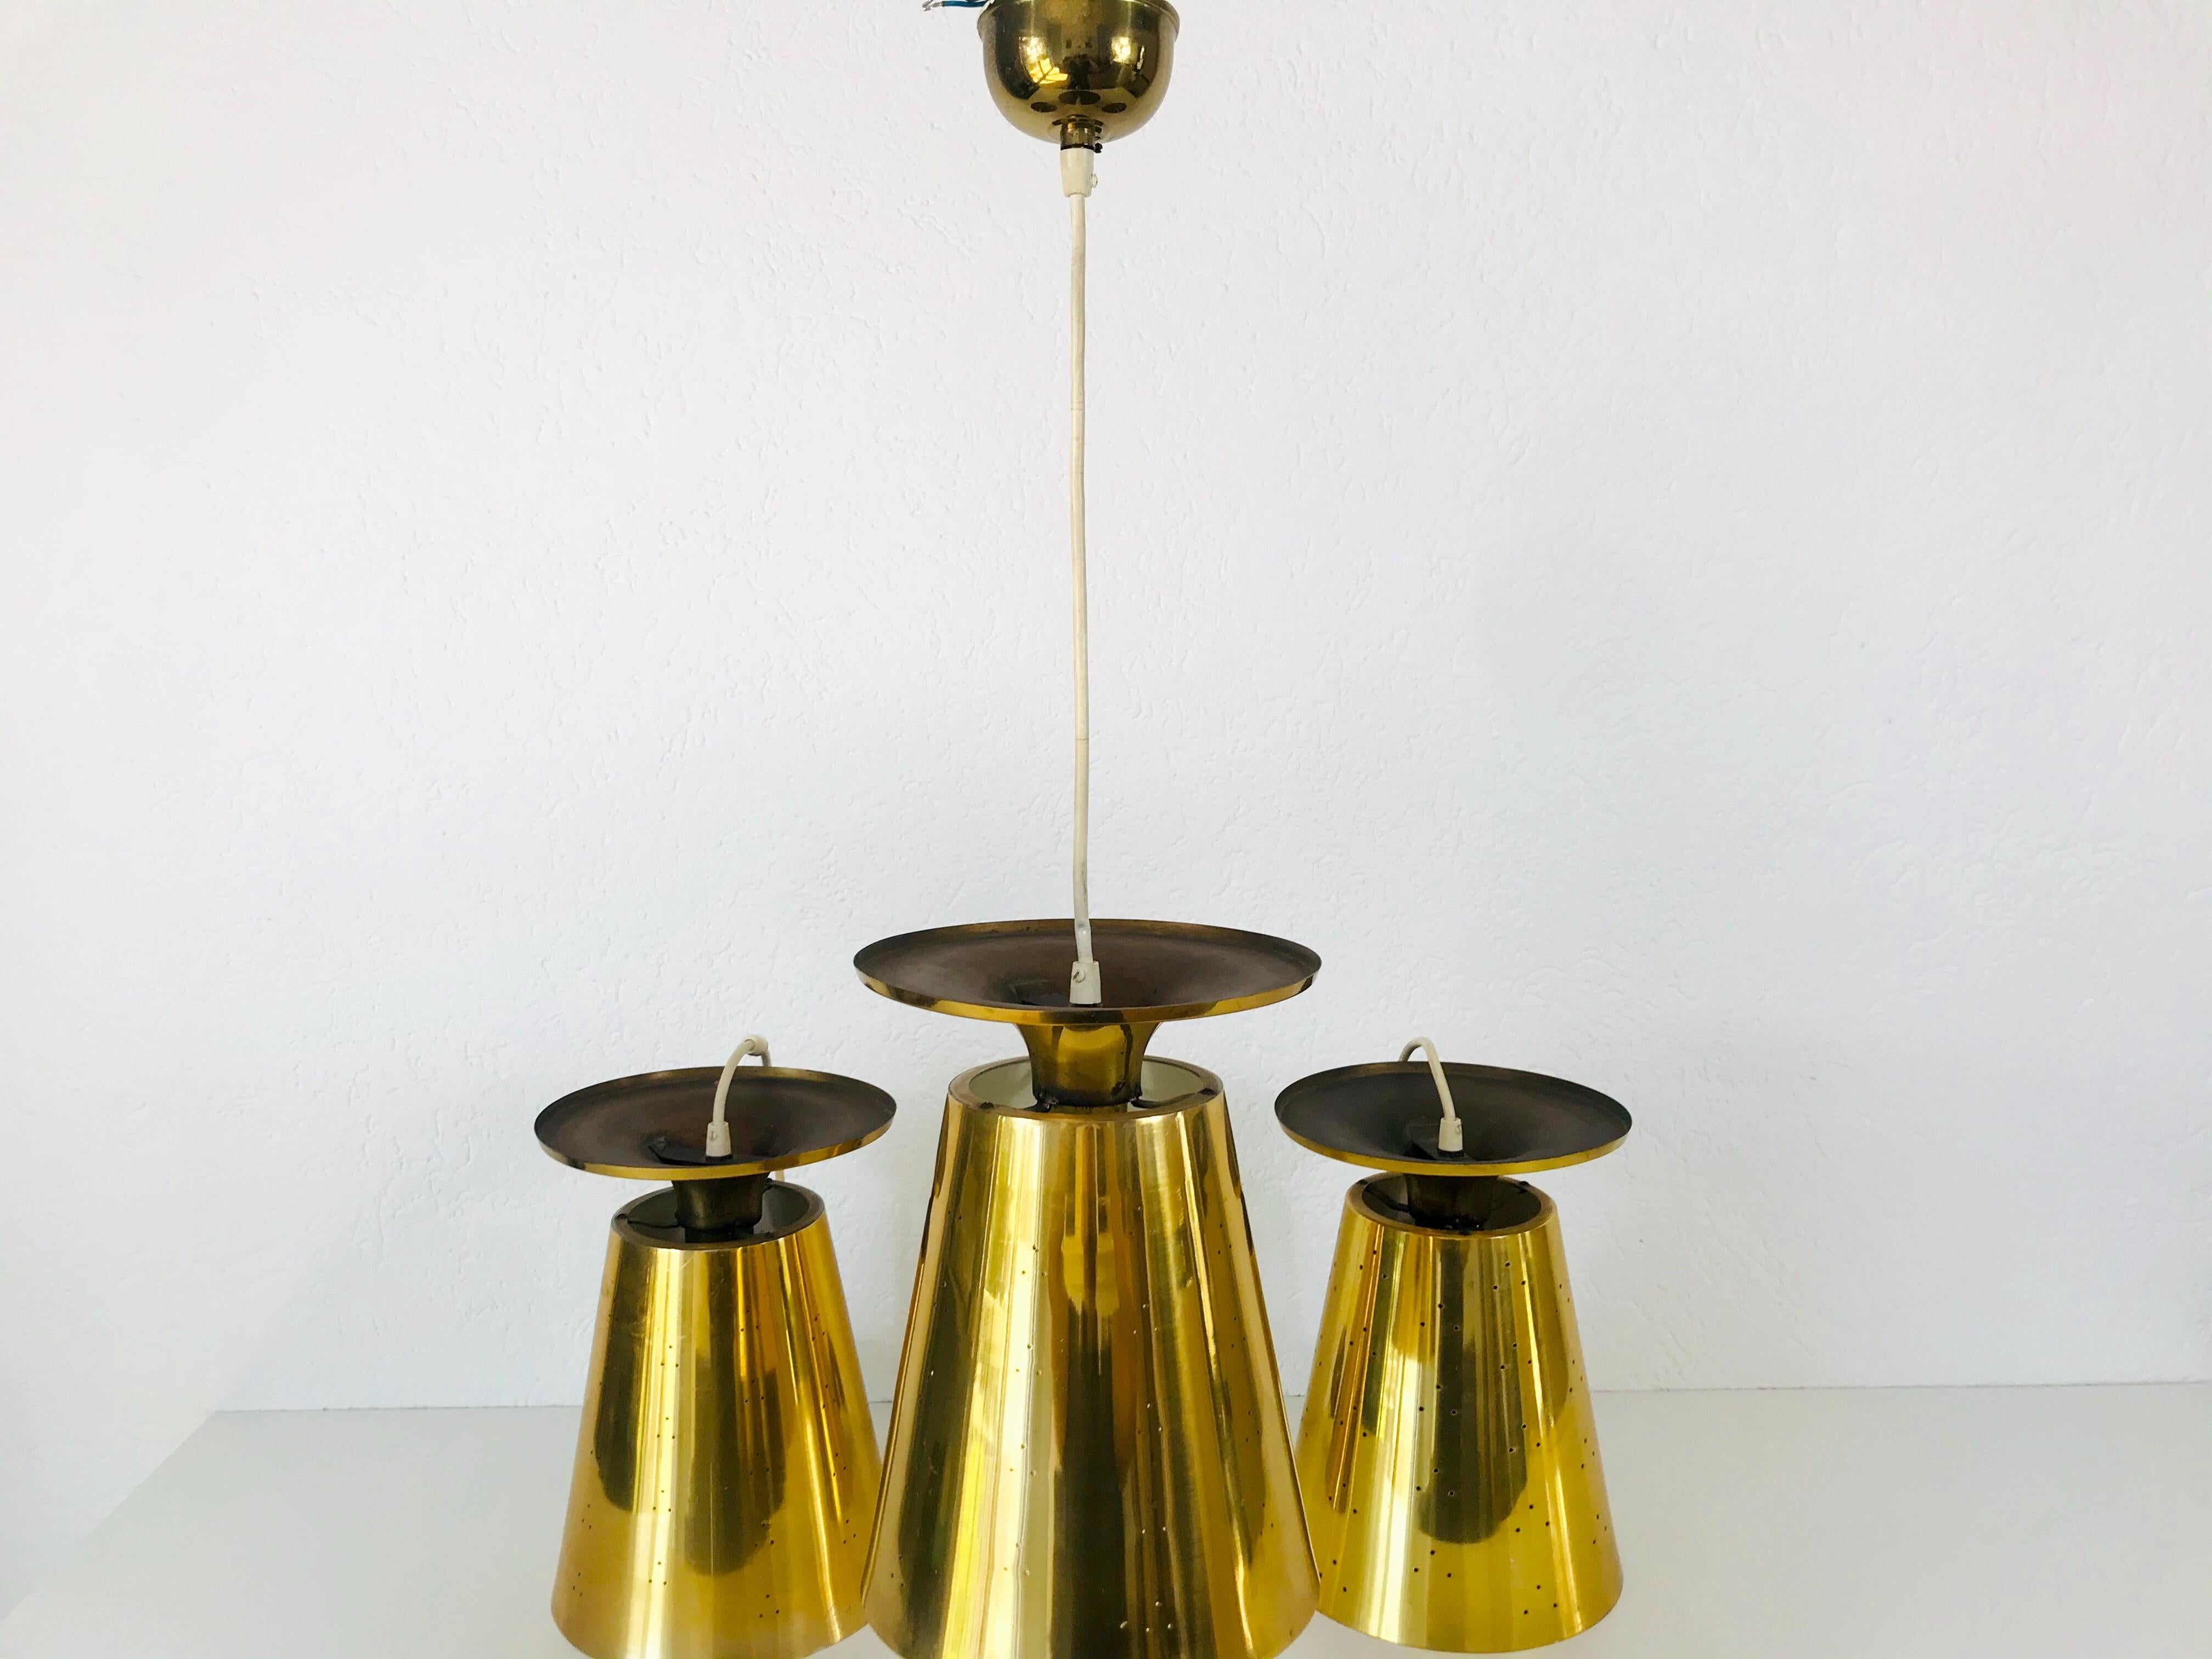 Set of 3 Polished Brass Pendant Lamps Attributed to Paavo Tynell, 1950s For Sale 5